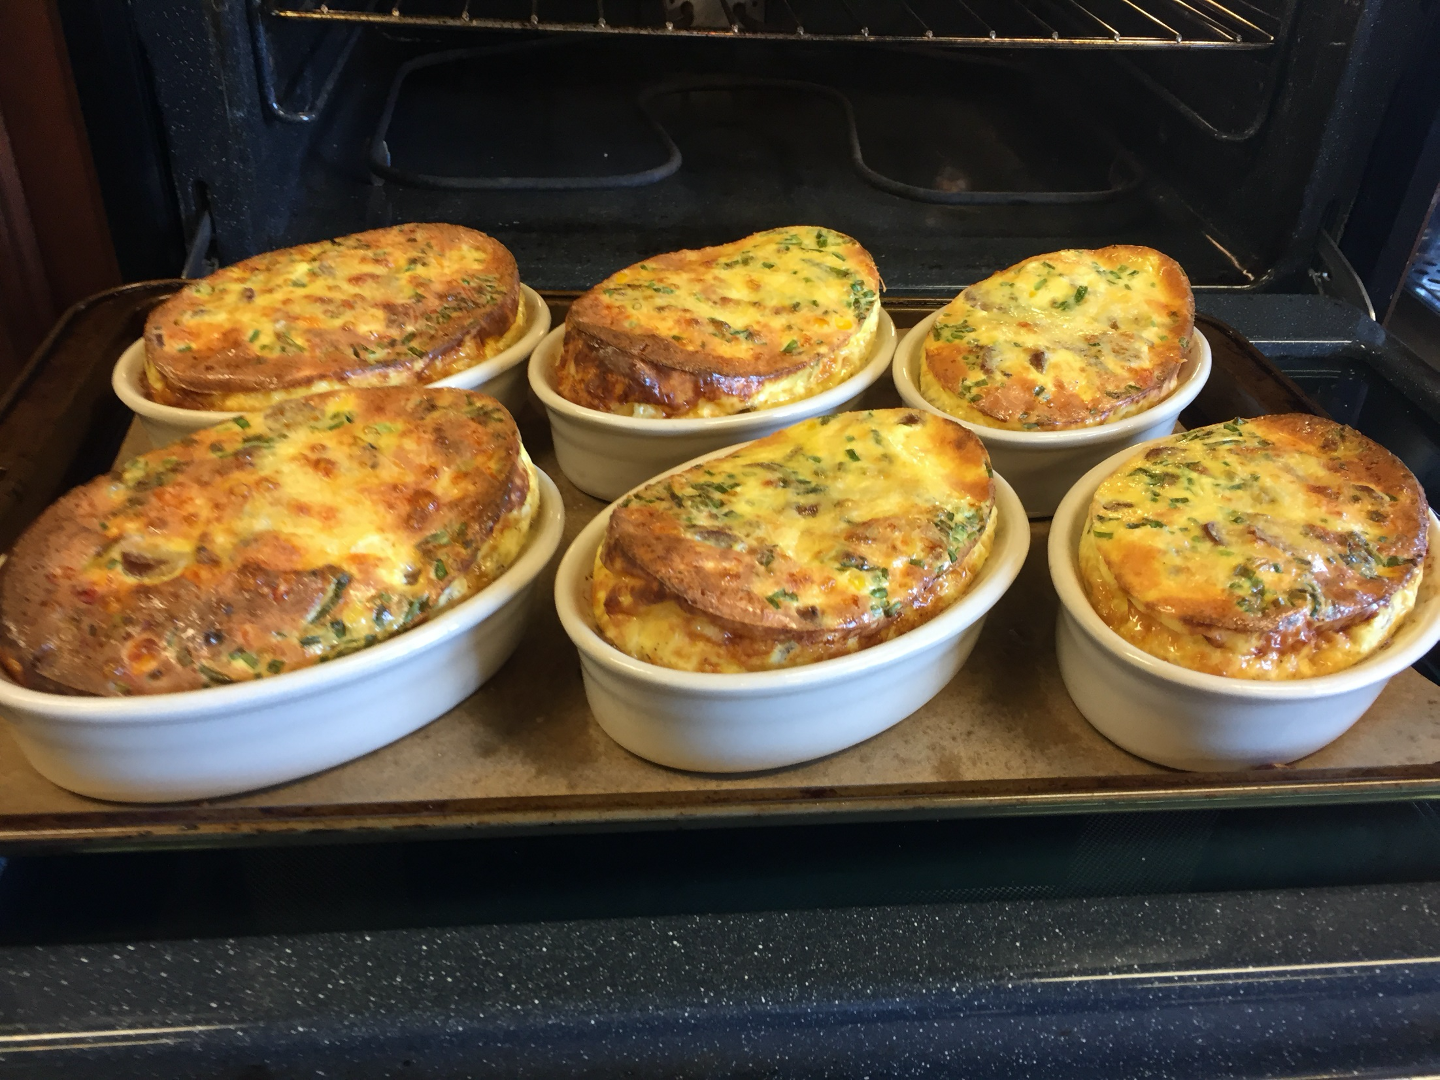 Quiche with chives coming out of oven